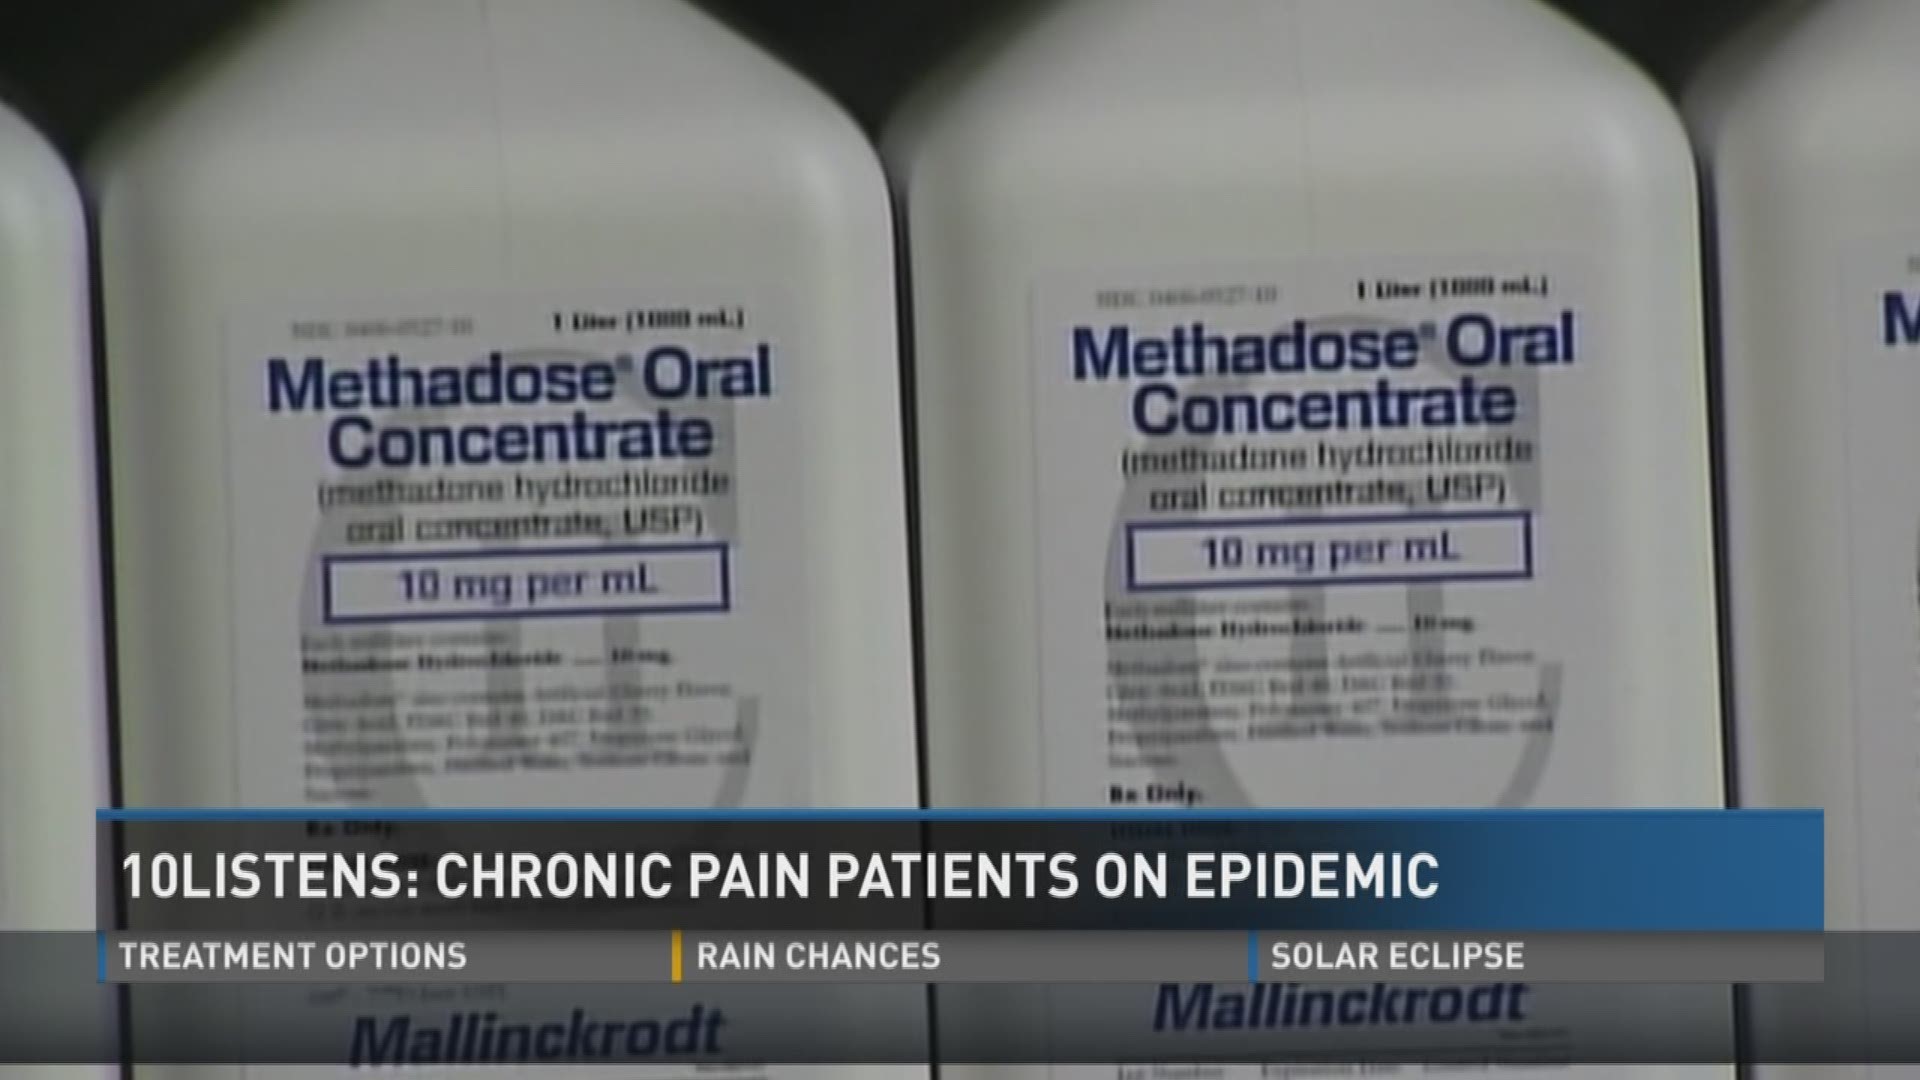 A woman with chronic pain talks about her experience with opioids.